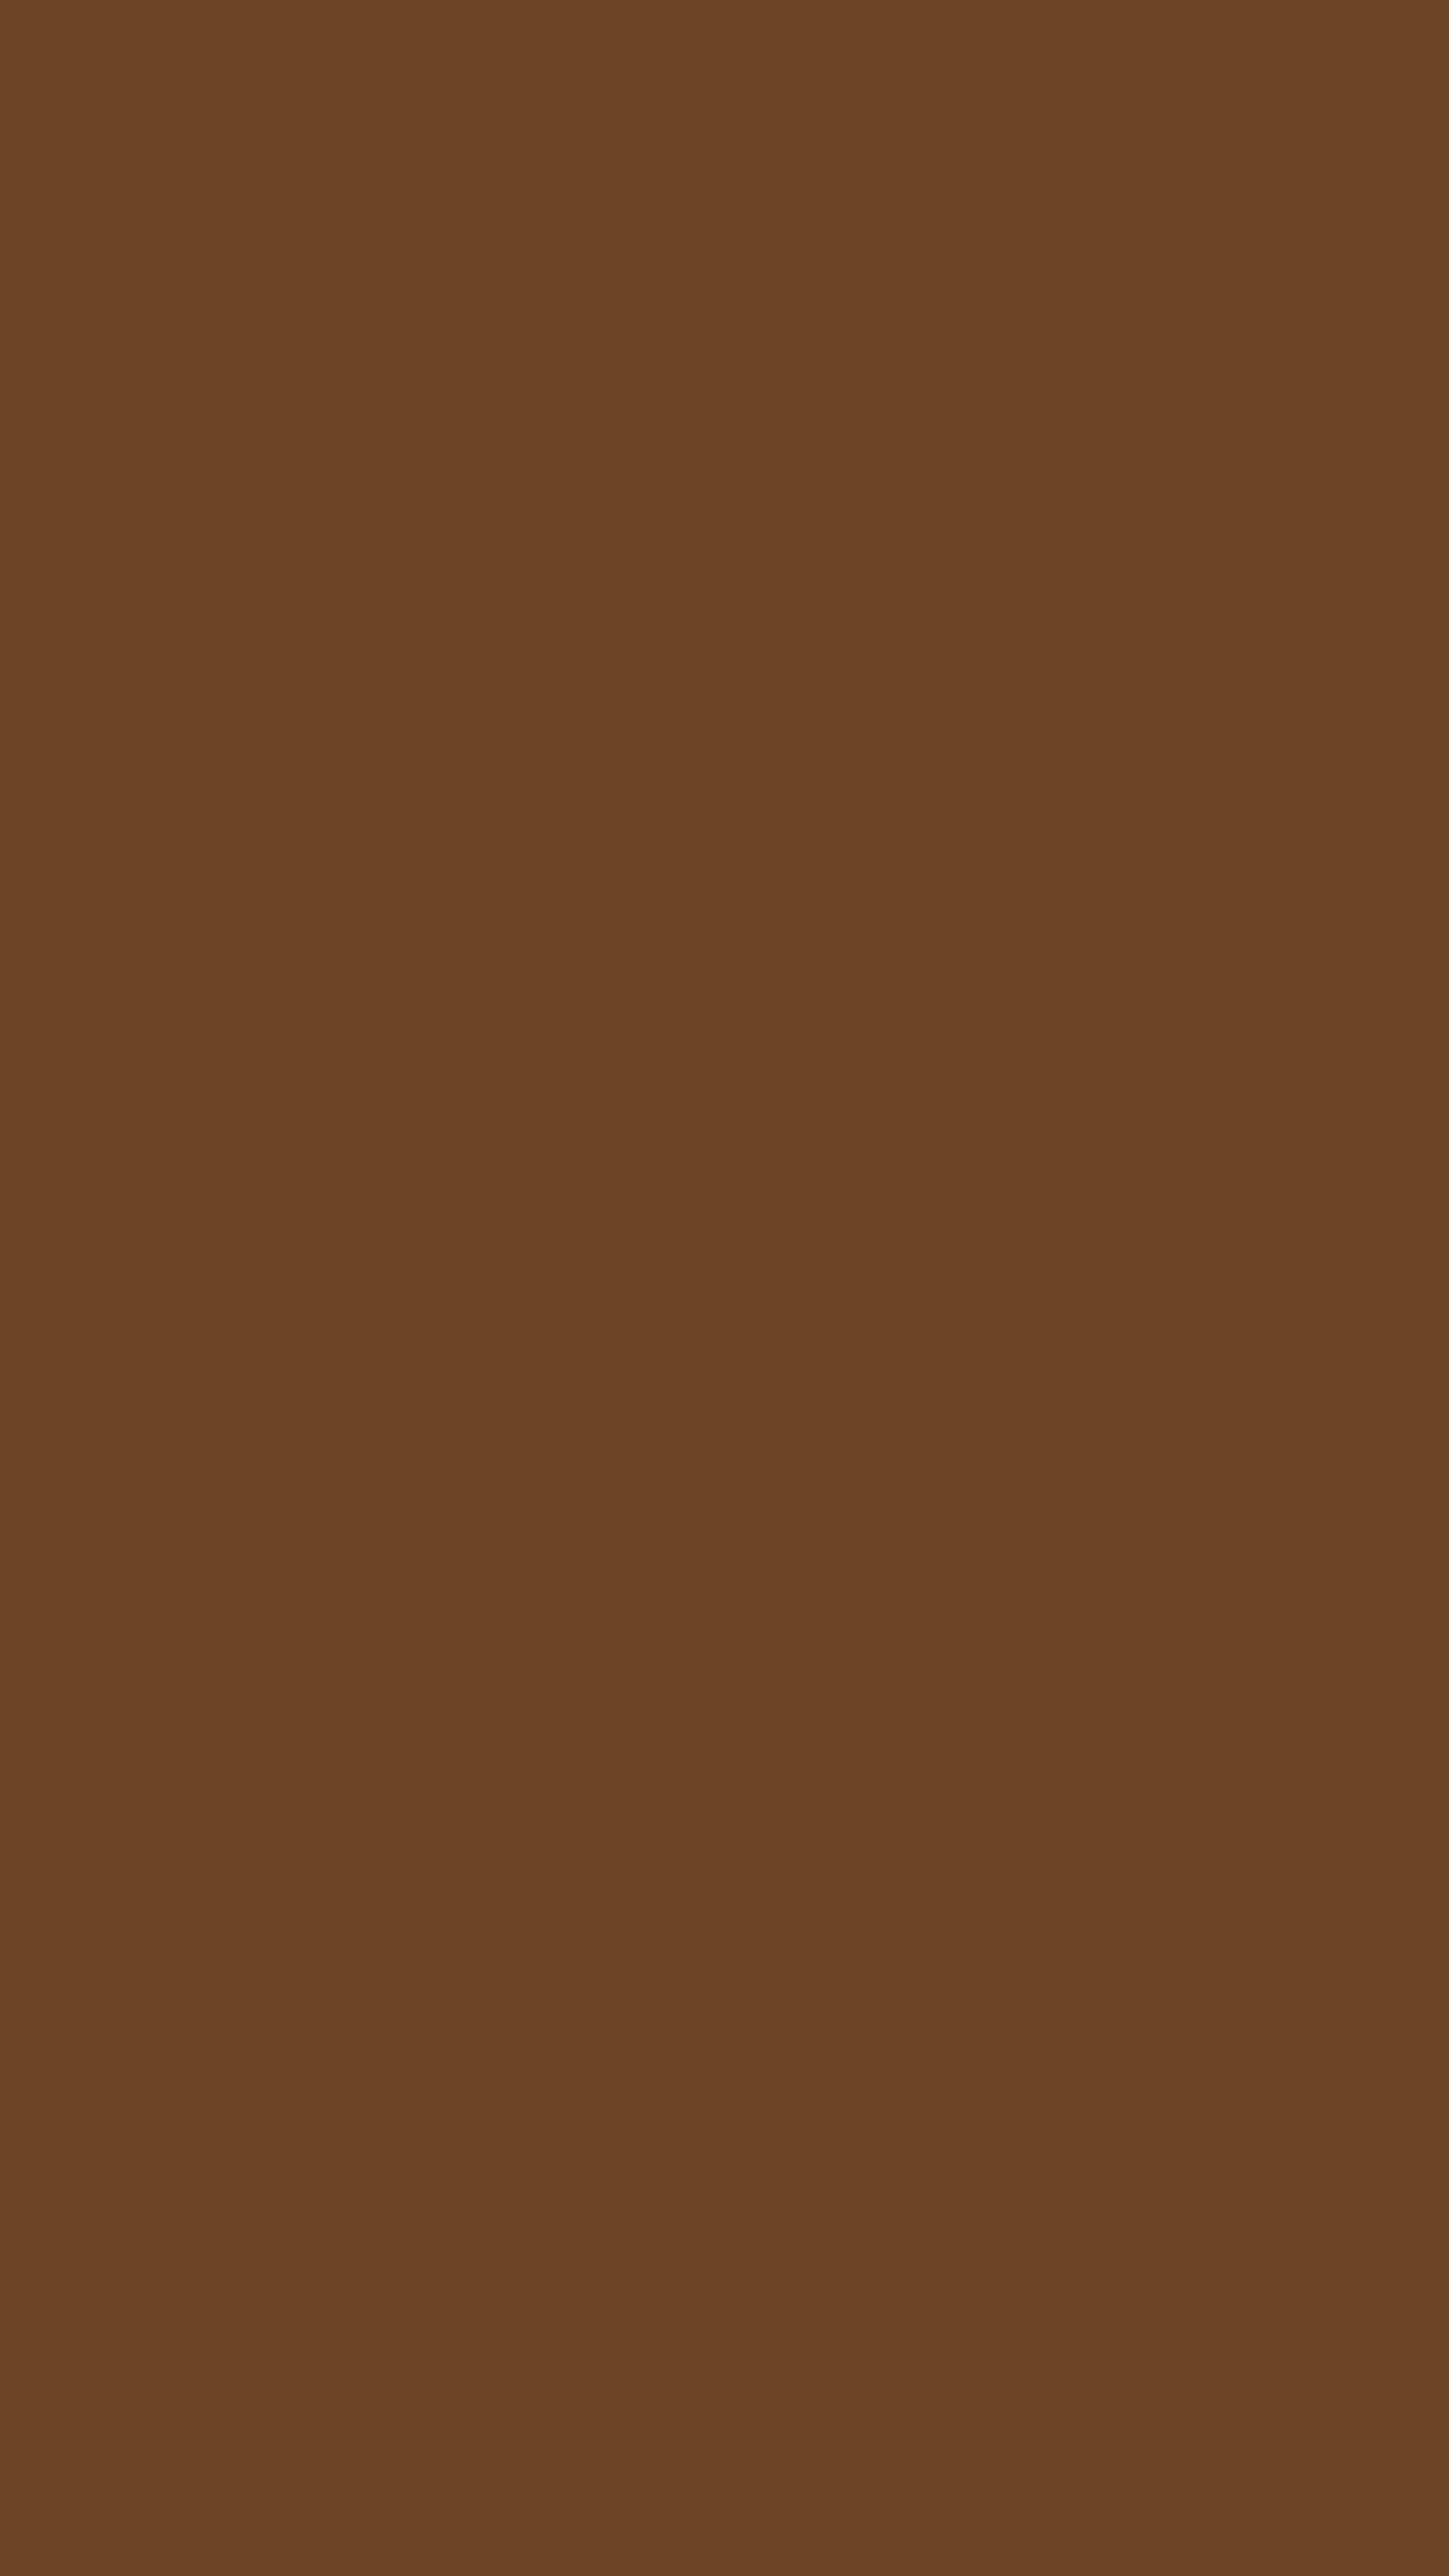 Solid Brown Wallpapers   Top Free Solid Brown Backgrounds